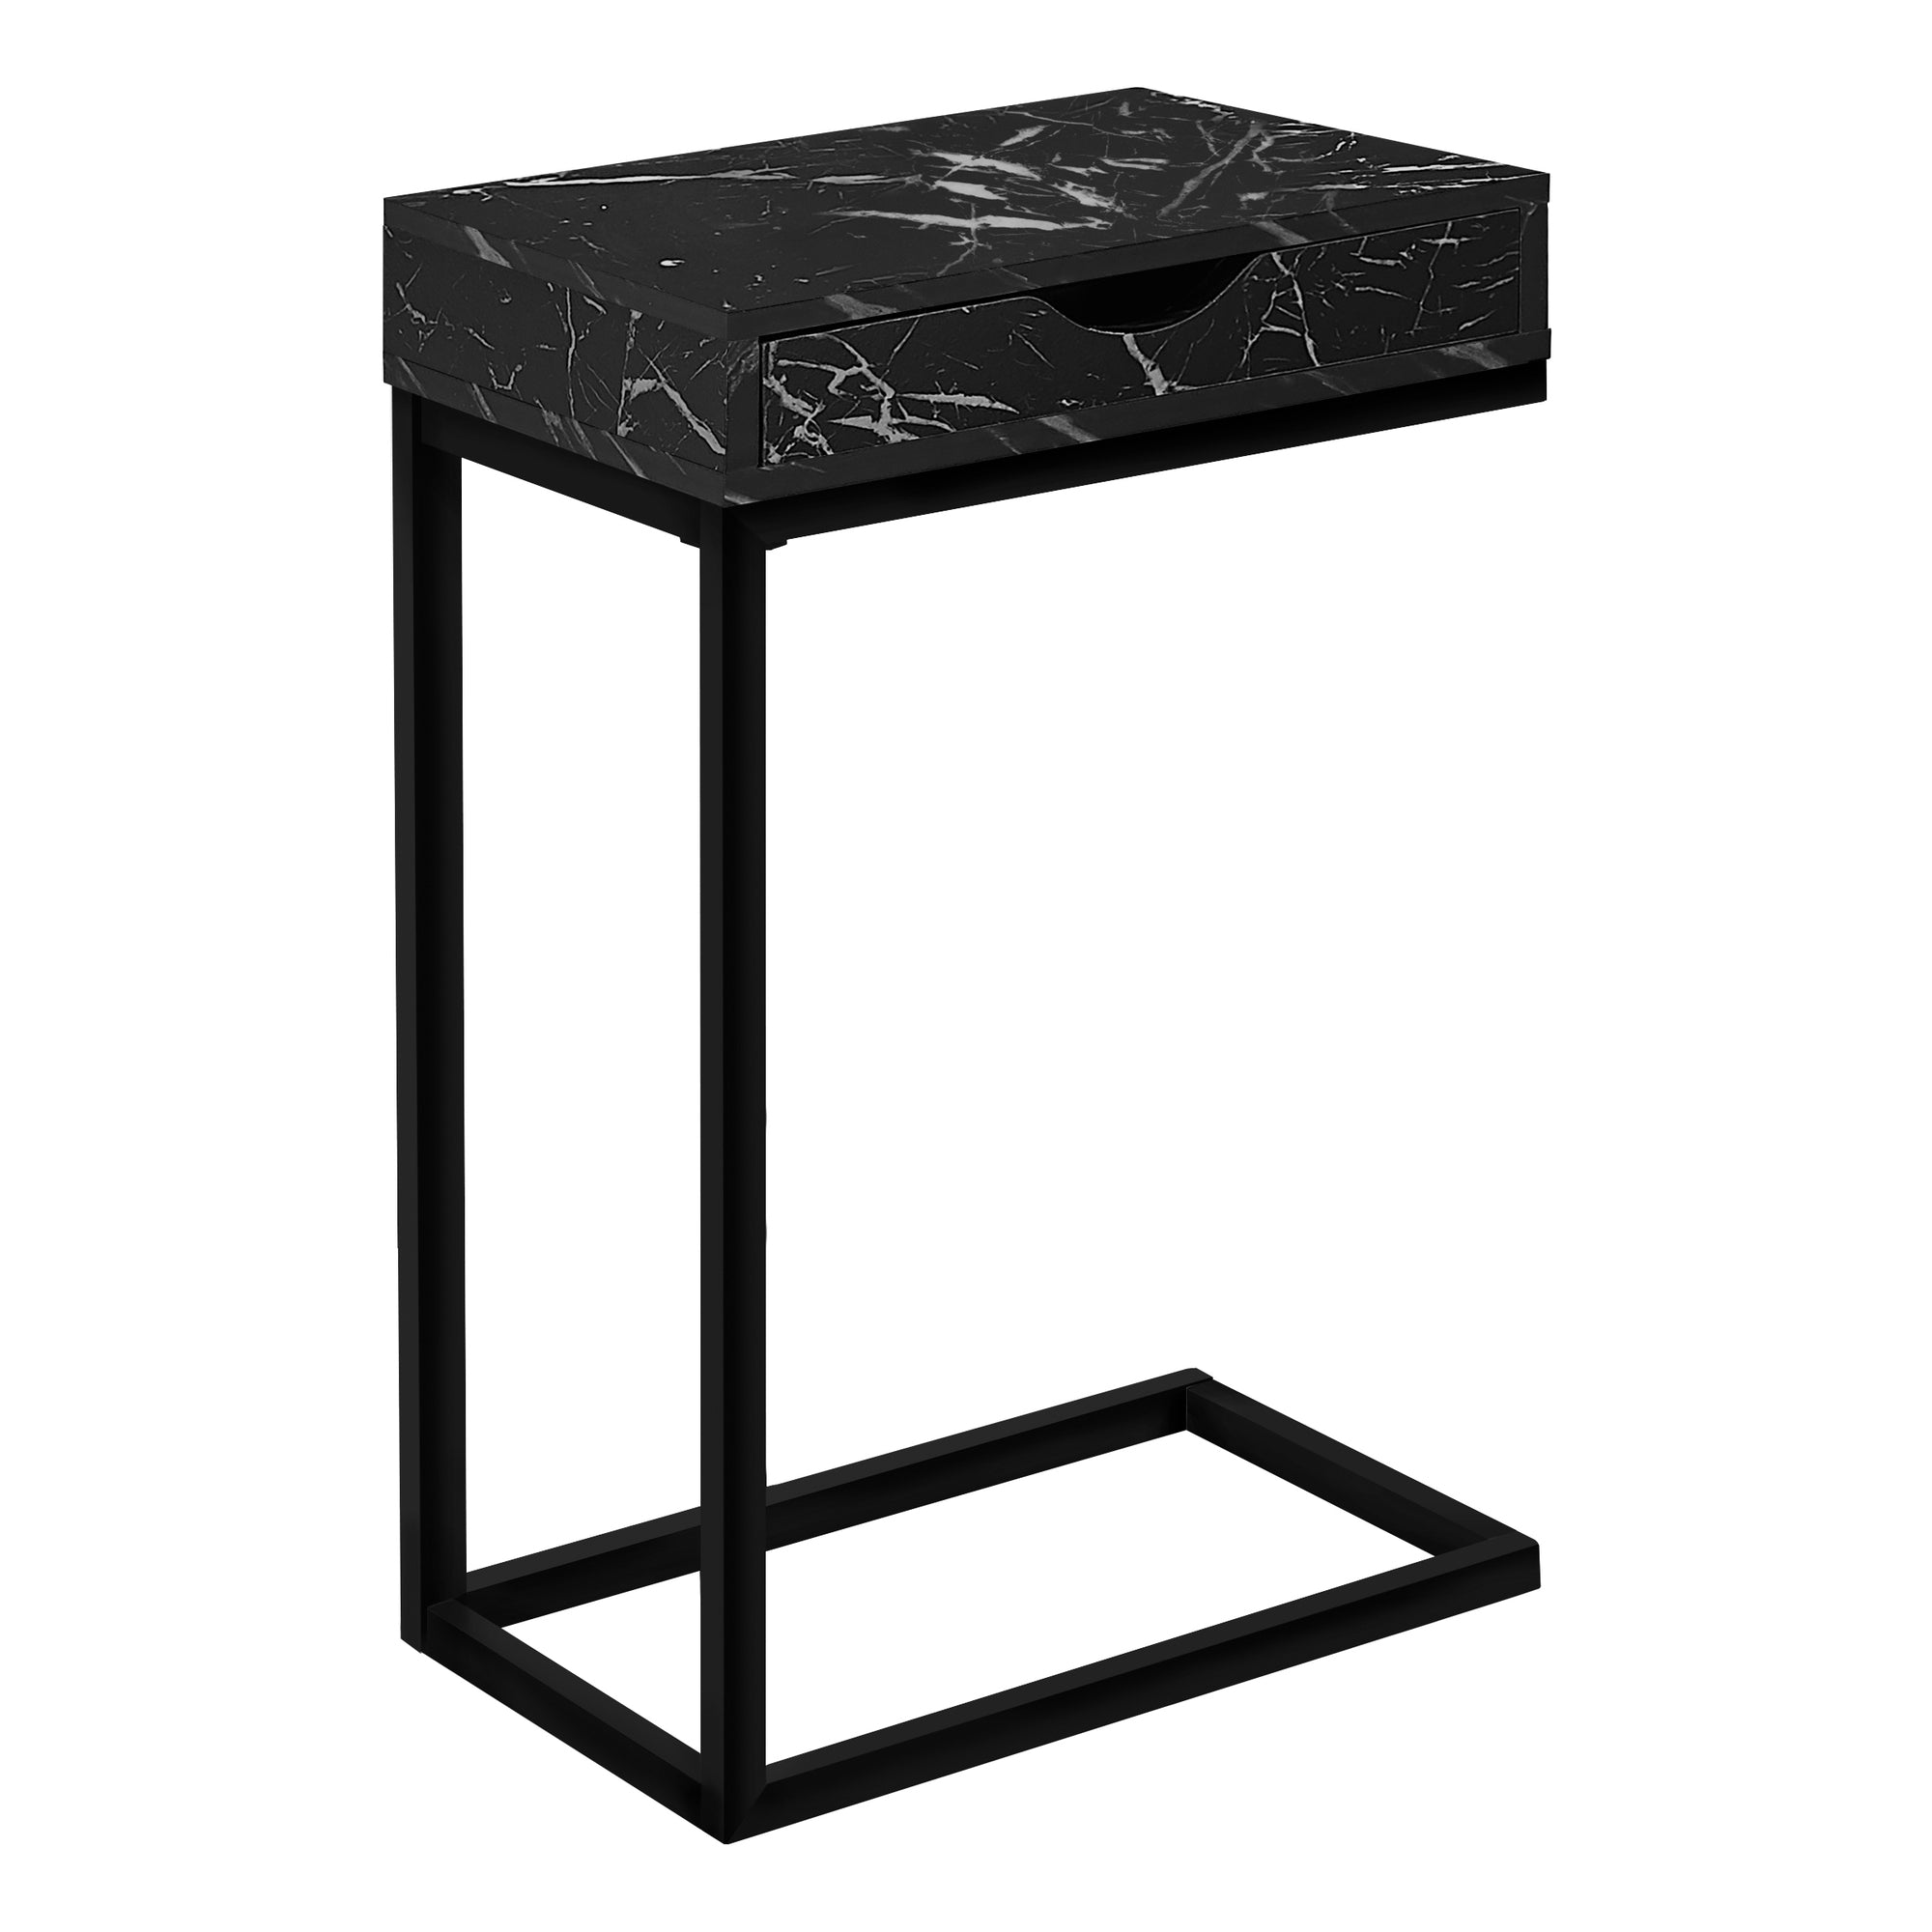 MN-623604    Accent Table, C-Shaped, End, Side, Snack, Living Room, Bedroom, Storage Drawer, Metal Frame, Laminate, Black Marble-Look, Contemporary, Modern